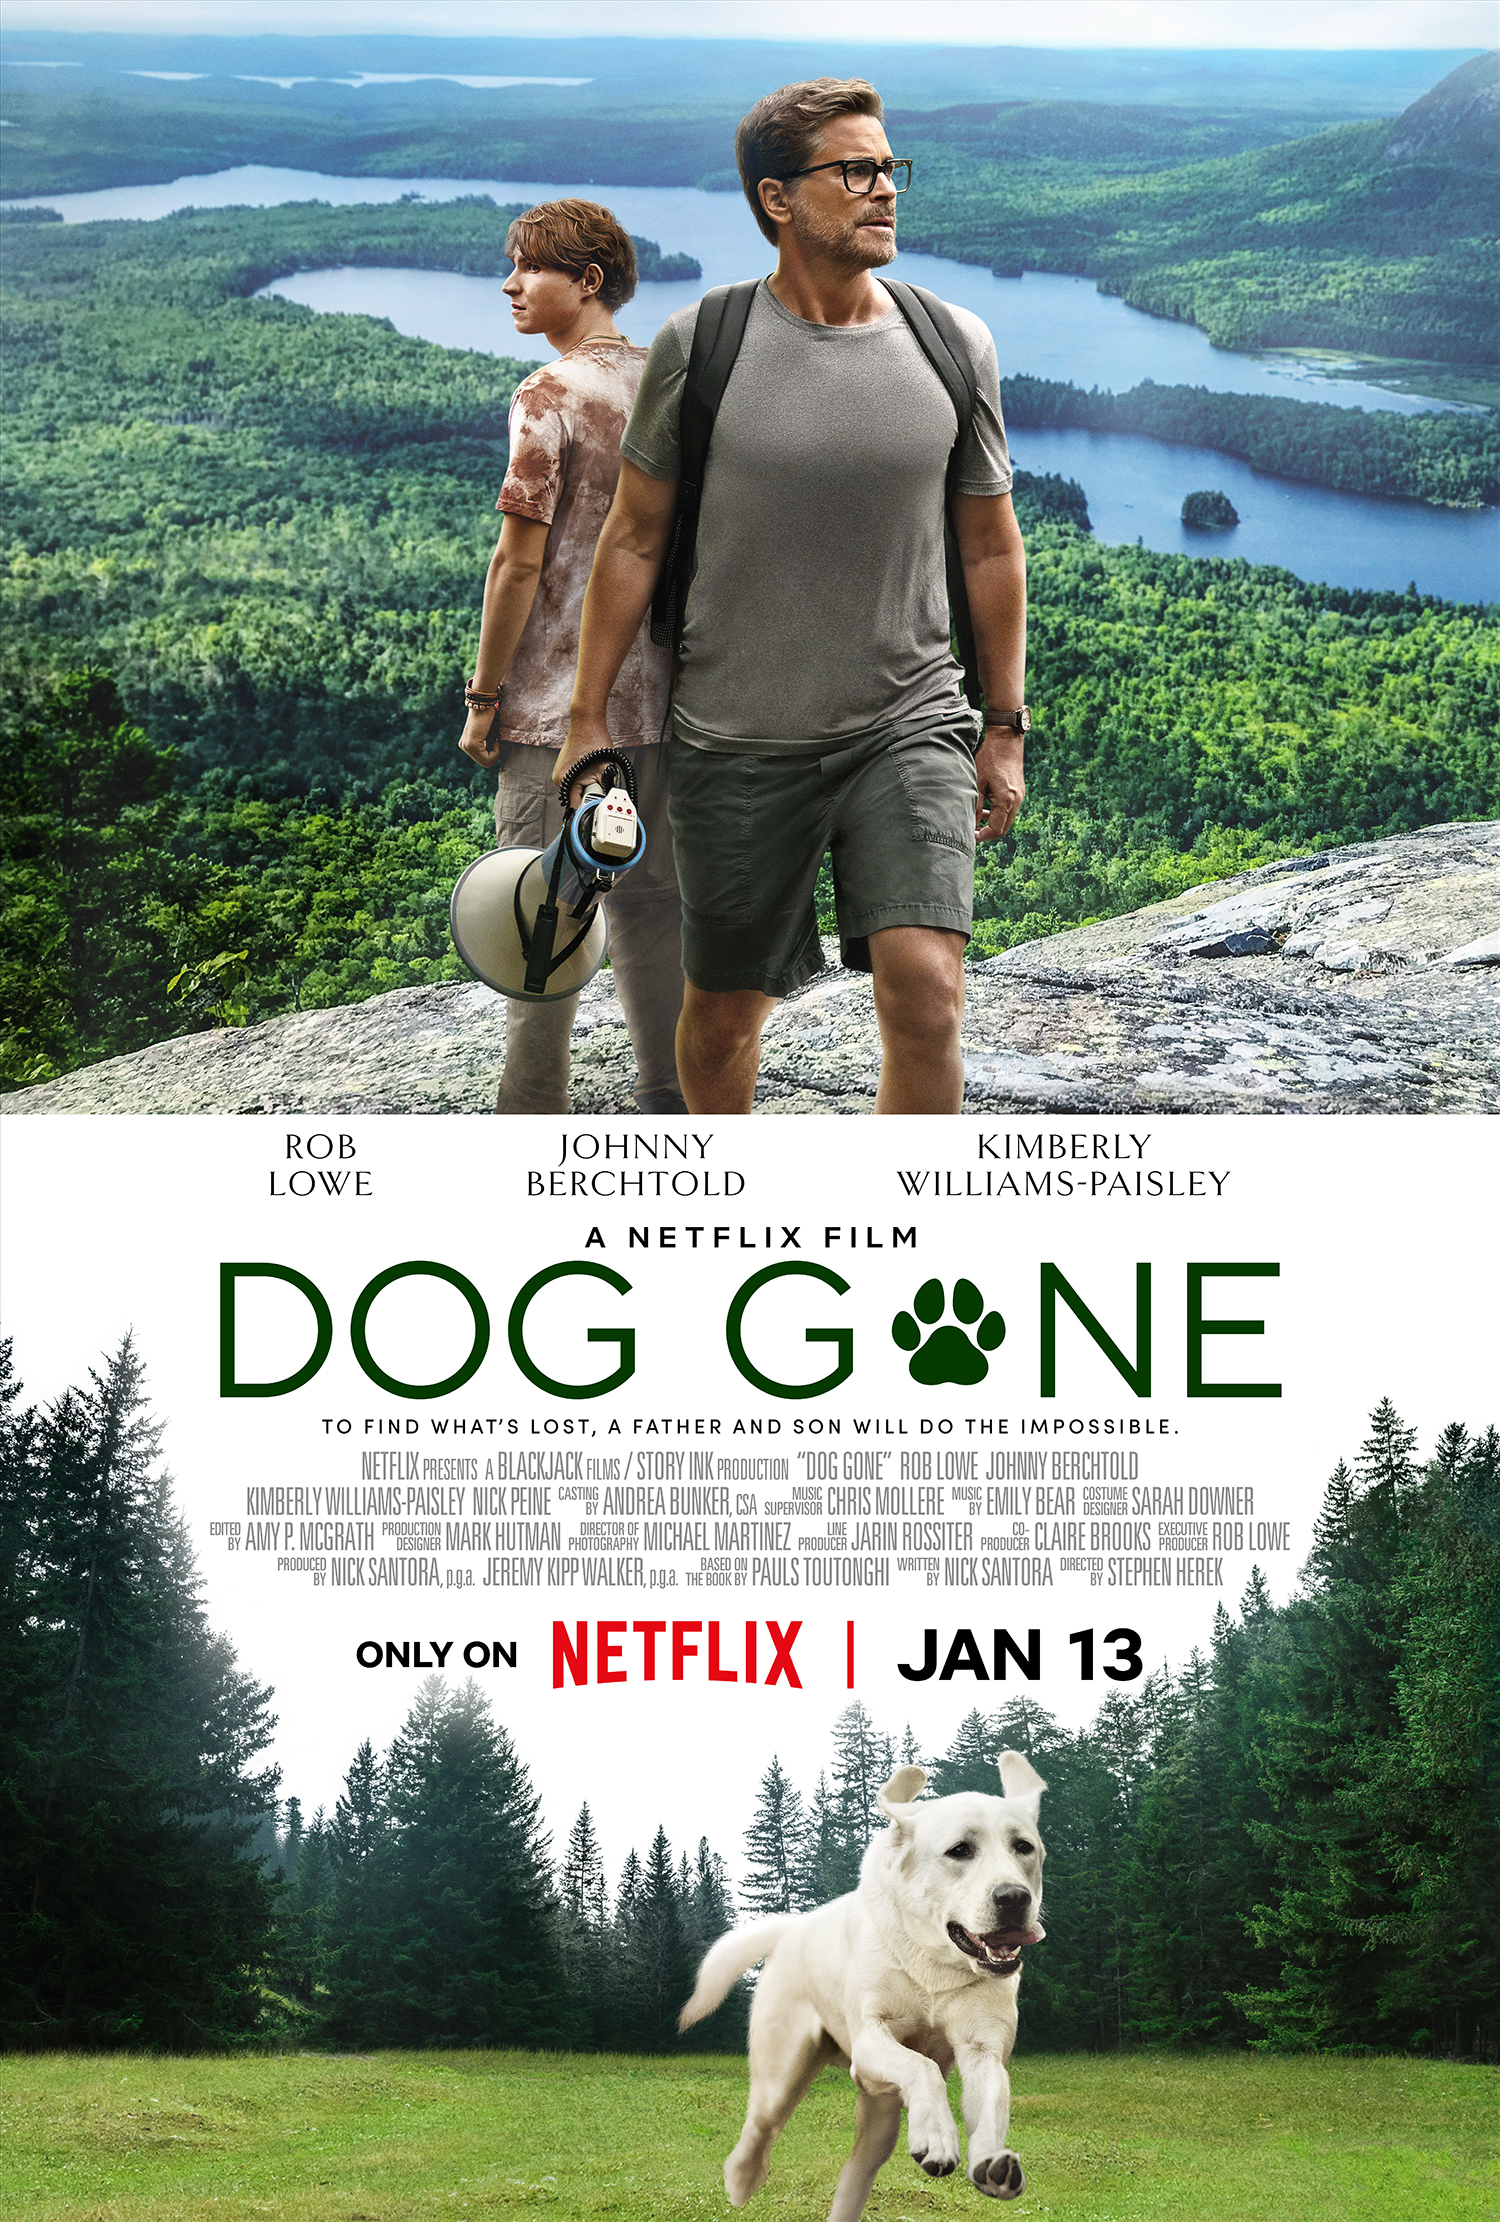 DOG GONE Starring Rob Lowe | Official Trailer Debut